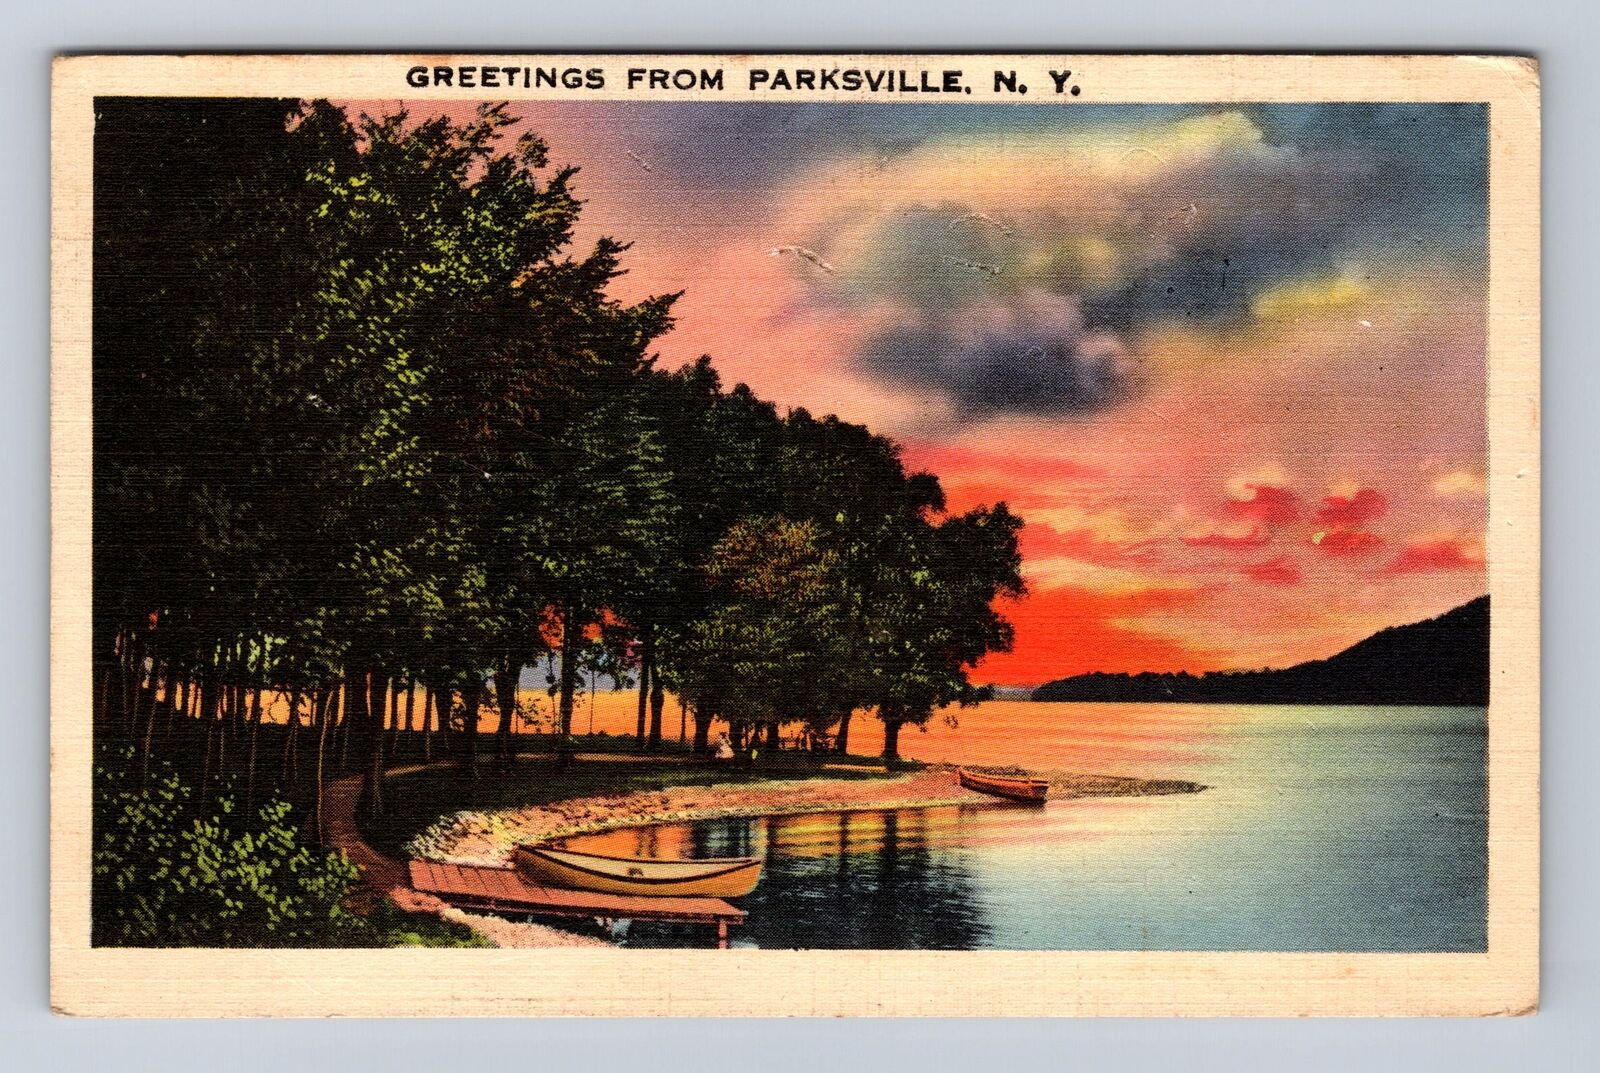 Parksville NY-New York, General Greetings, Lakeside, Vintage c1939 Postcard